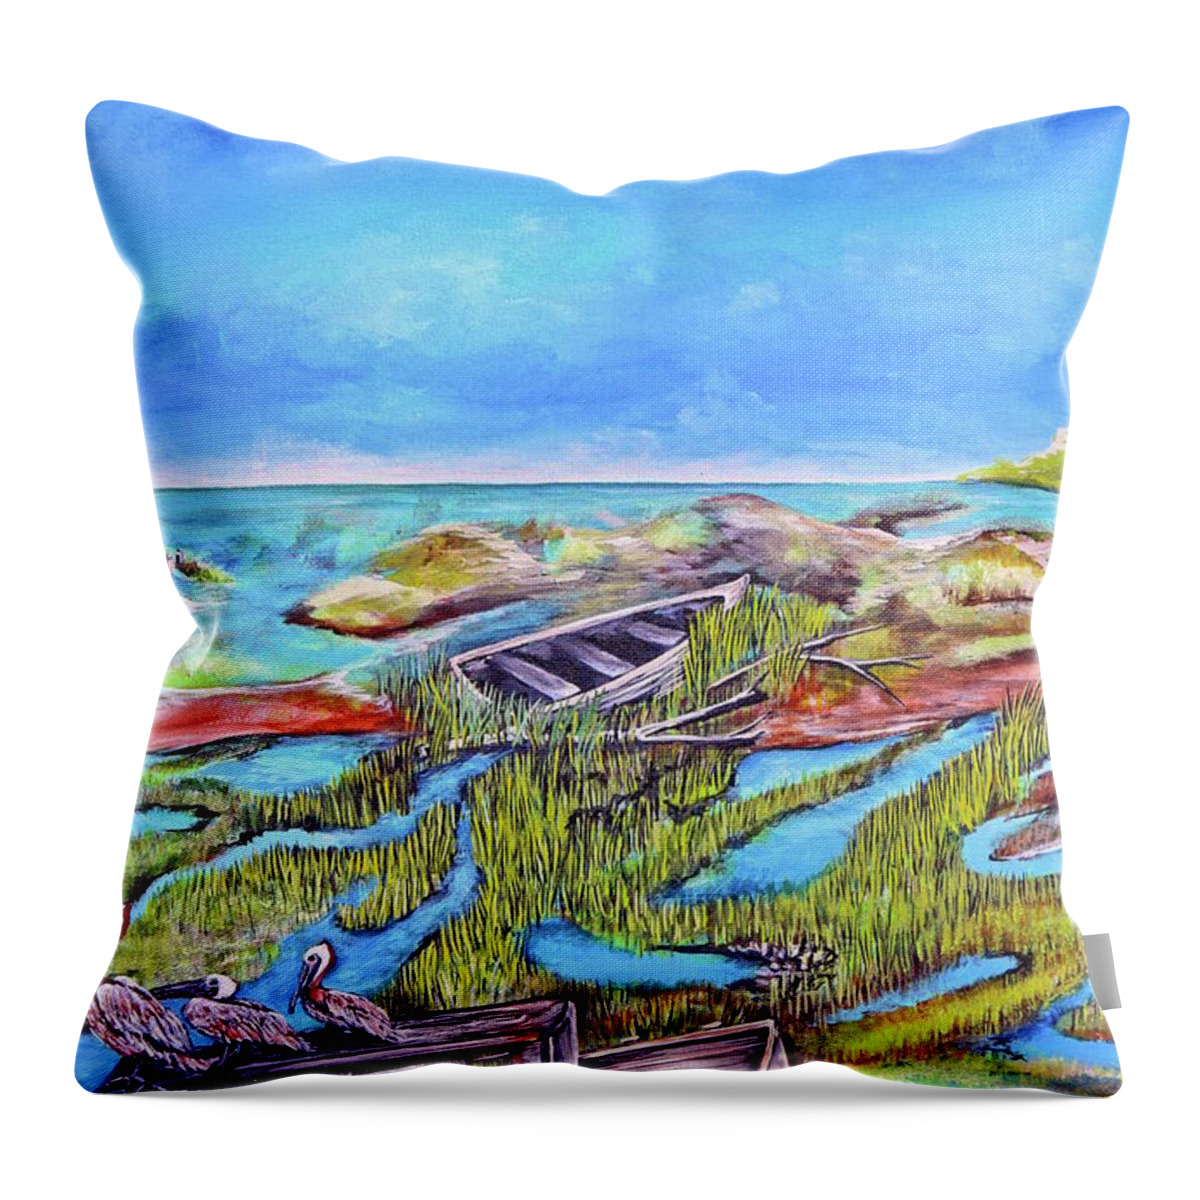 3 Peliquins Throw Pillow featuring the painting All Washed Up by Virginia Bond